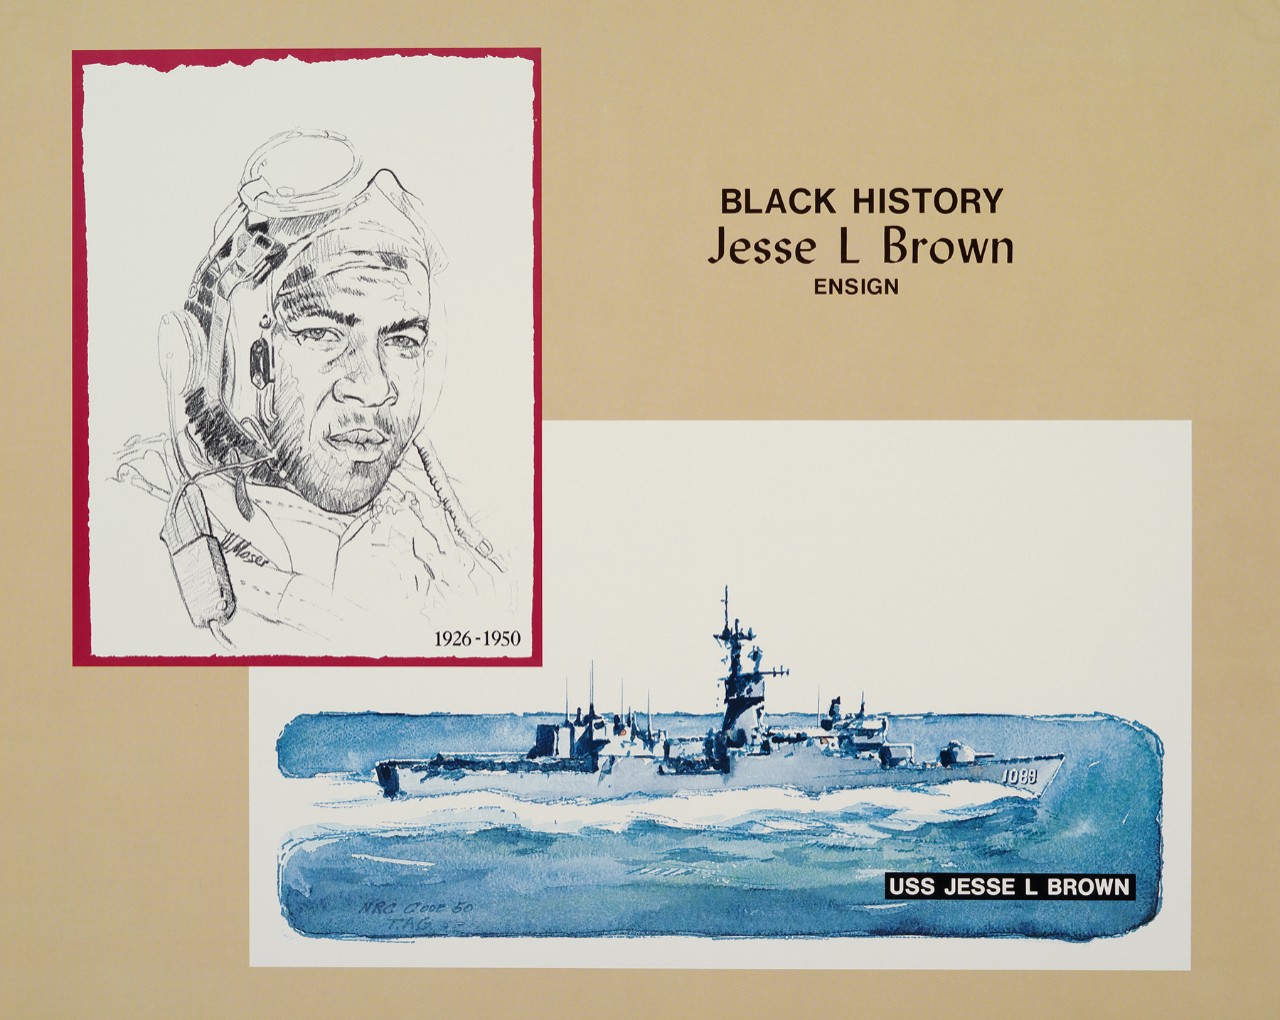 Two images in the upper left a portrait of Jesse Brown, the lower right USS Jesse L Brown, starboard side of the ship